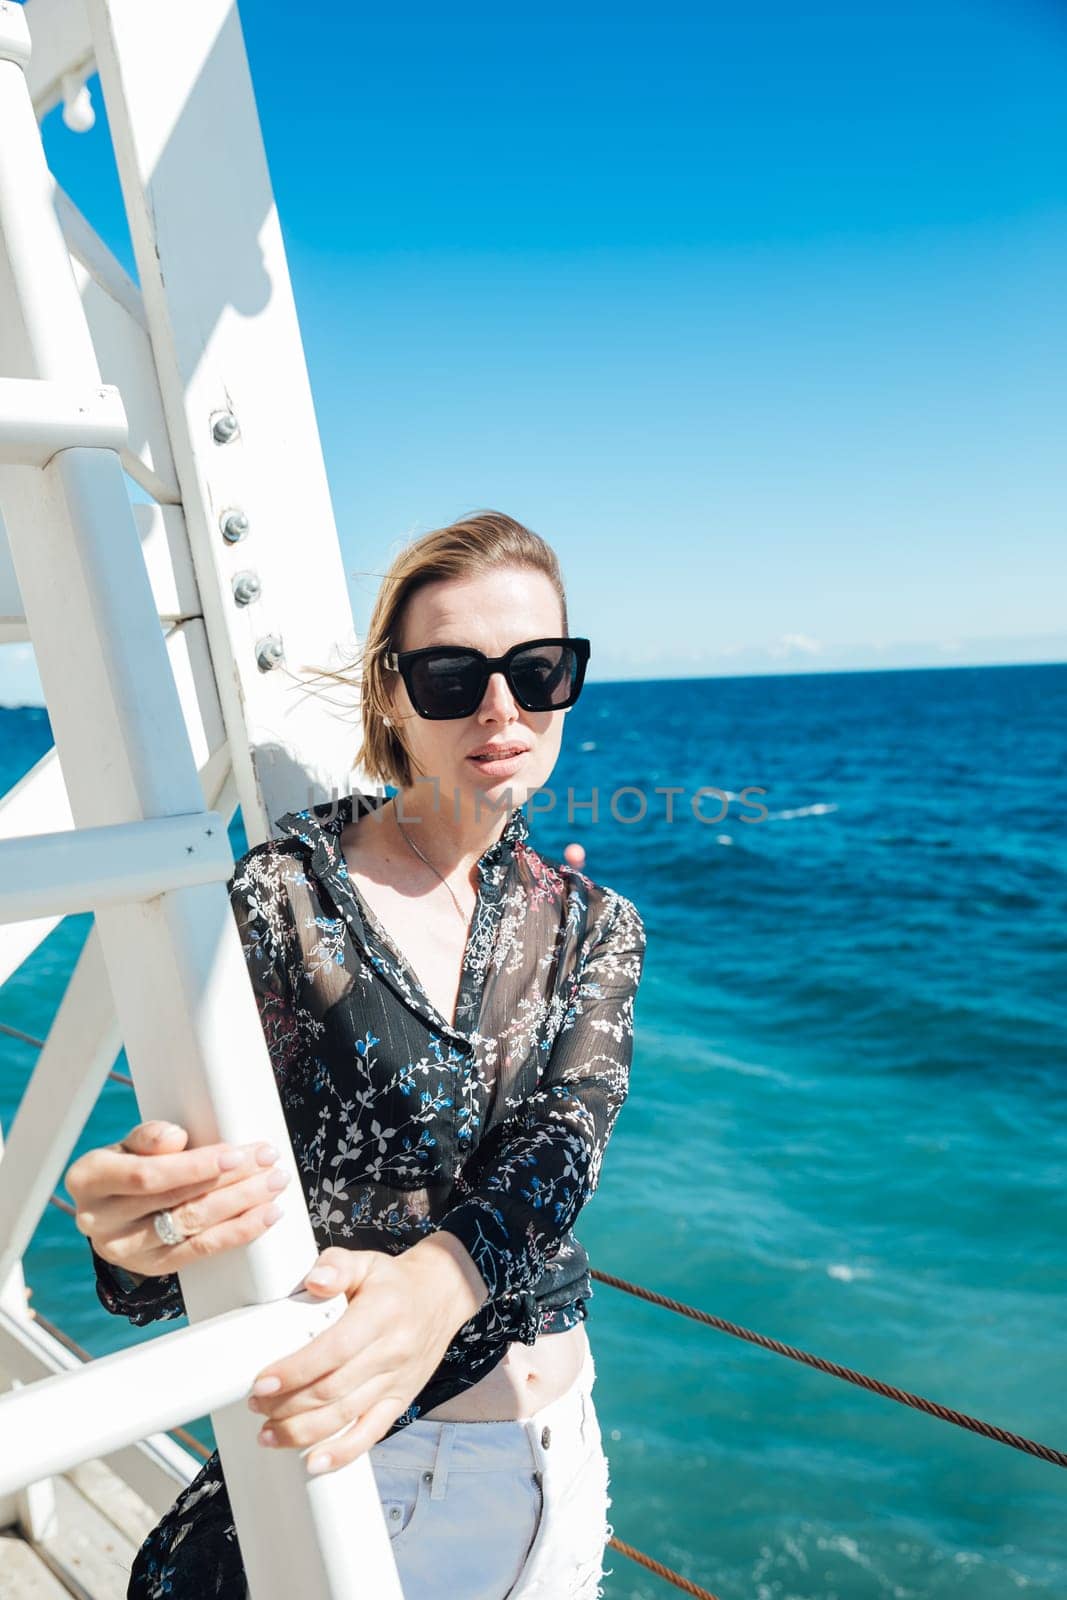 A woman wearing sunglasses near a rescue tower by the sea